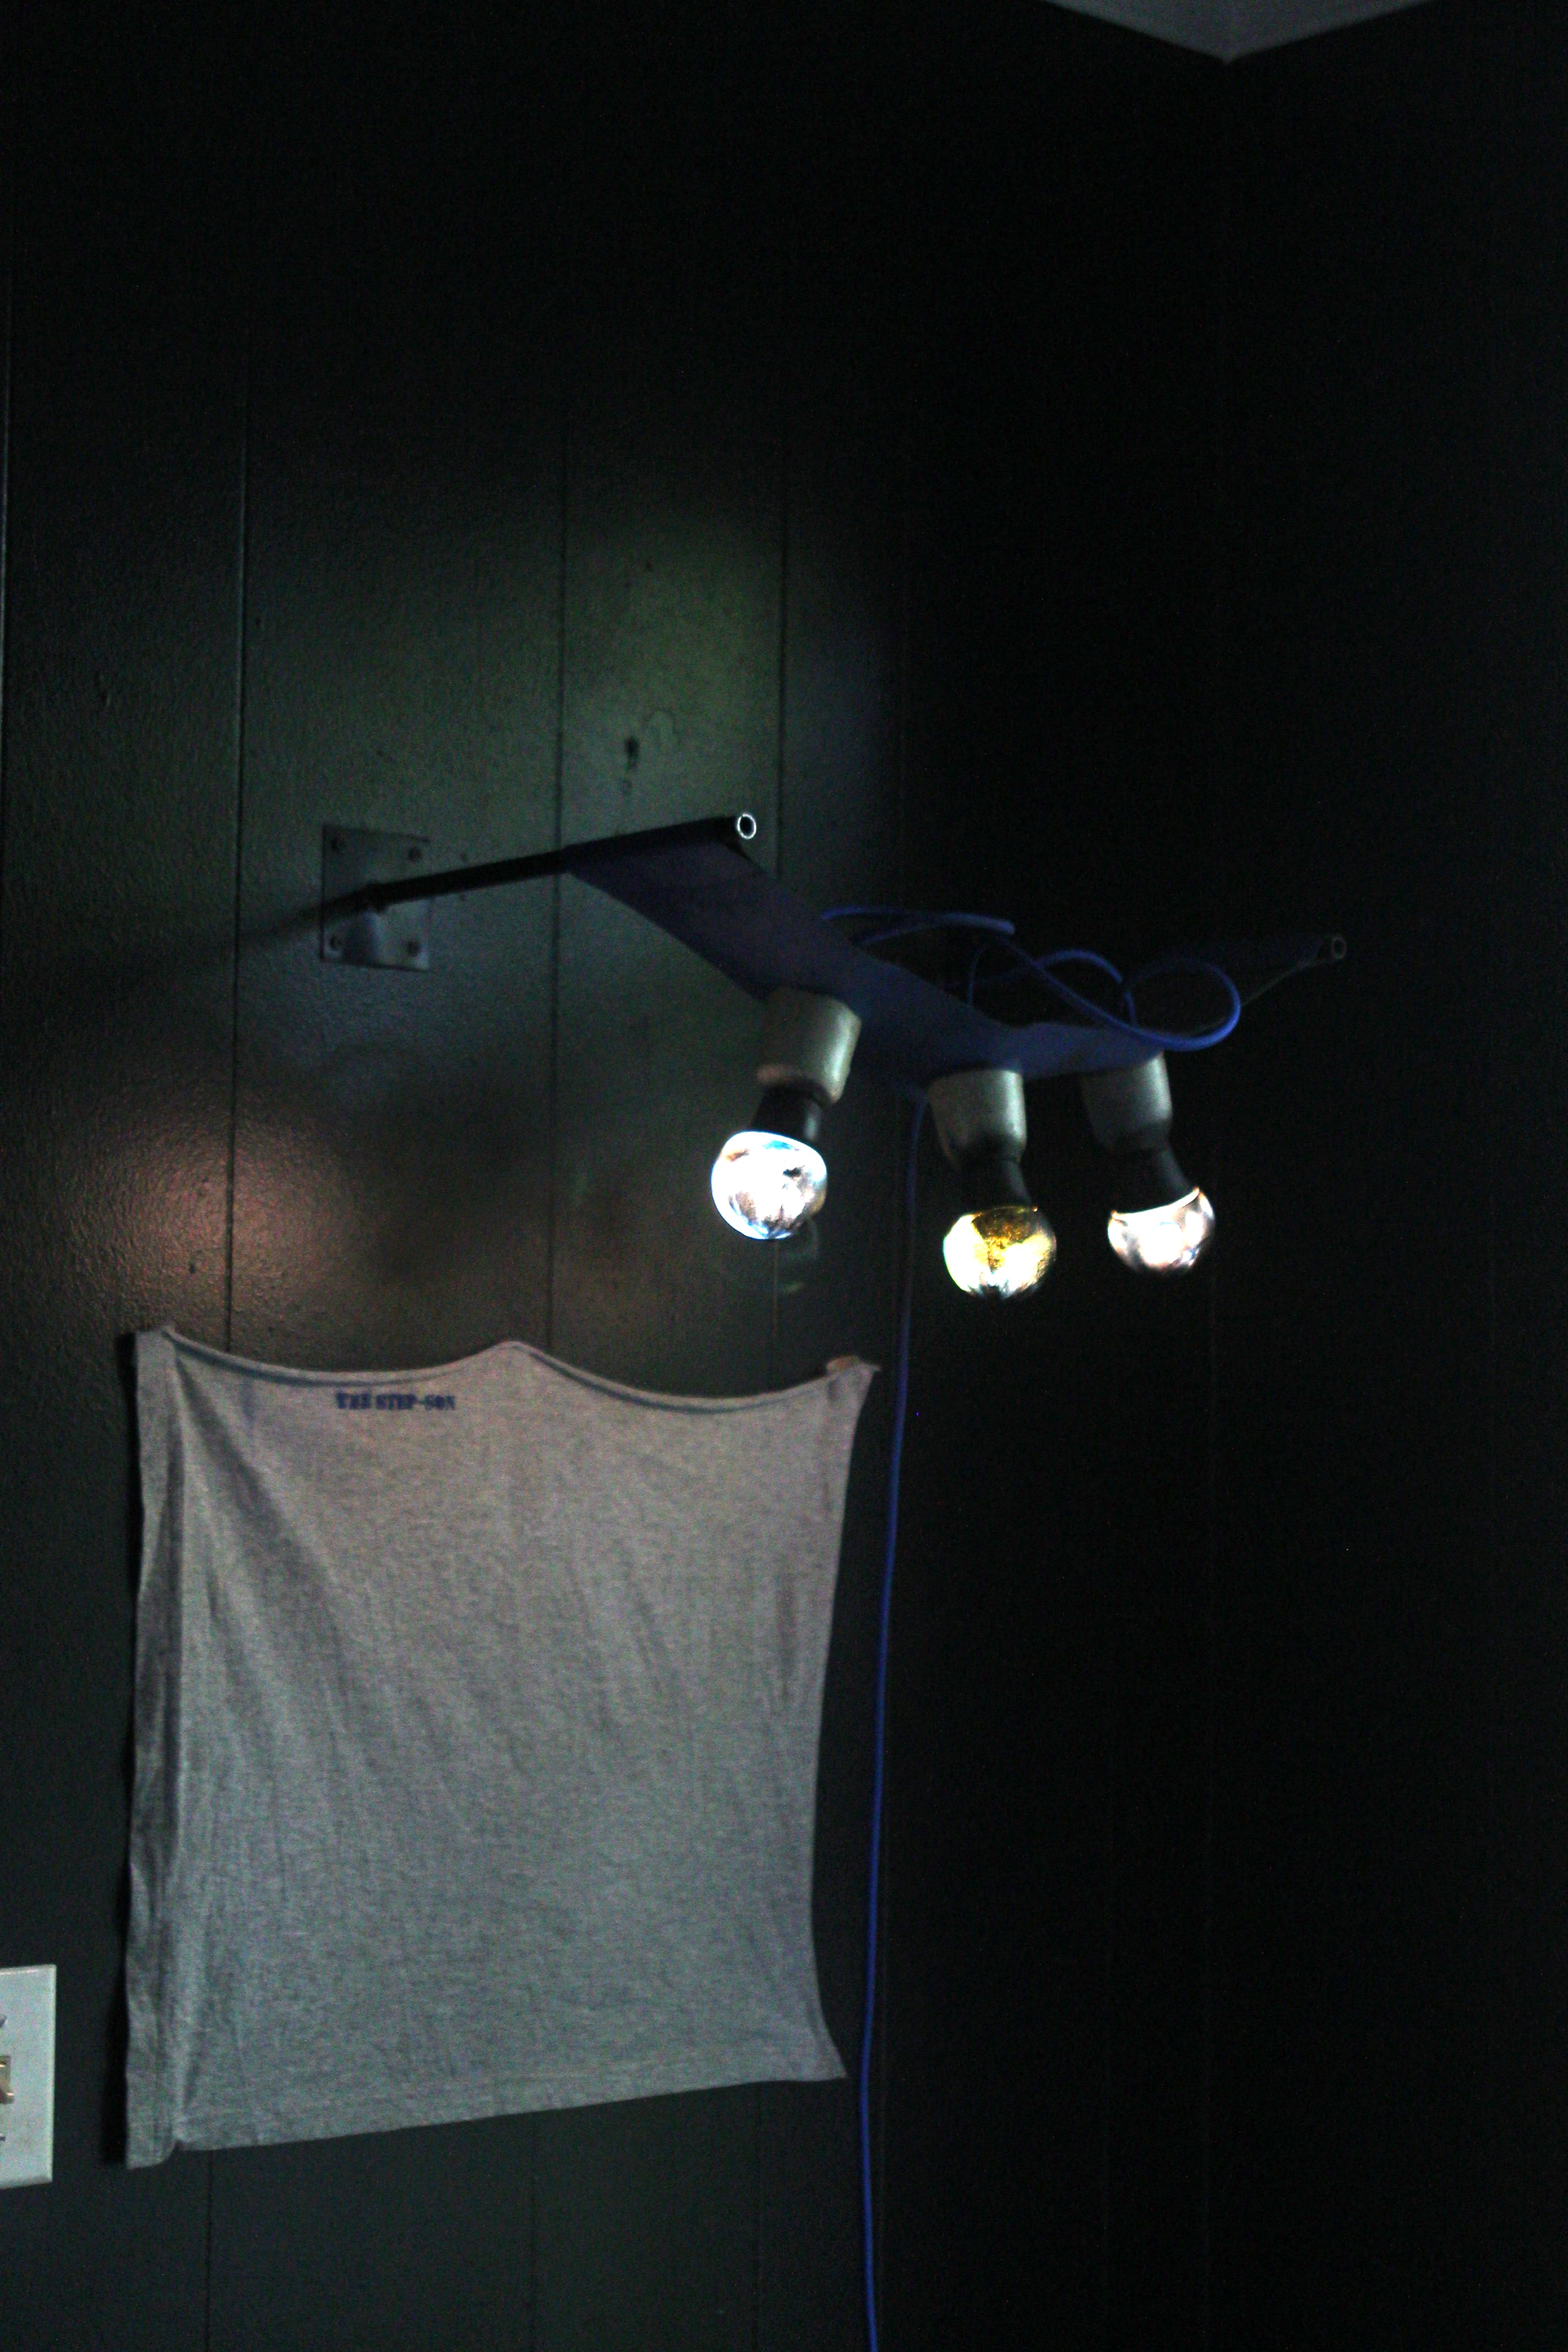 light ficture mounted into wall with 3 lights and ceramic housing in leather sling on metal framing. dim lighting